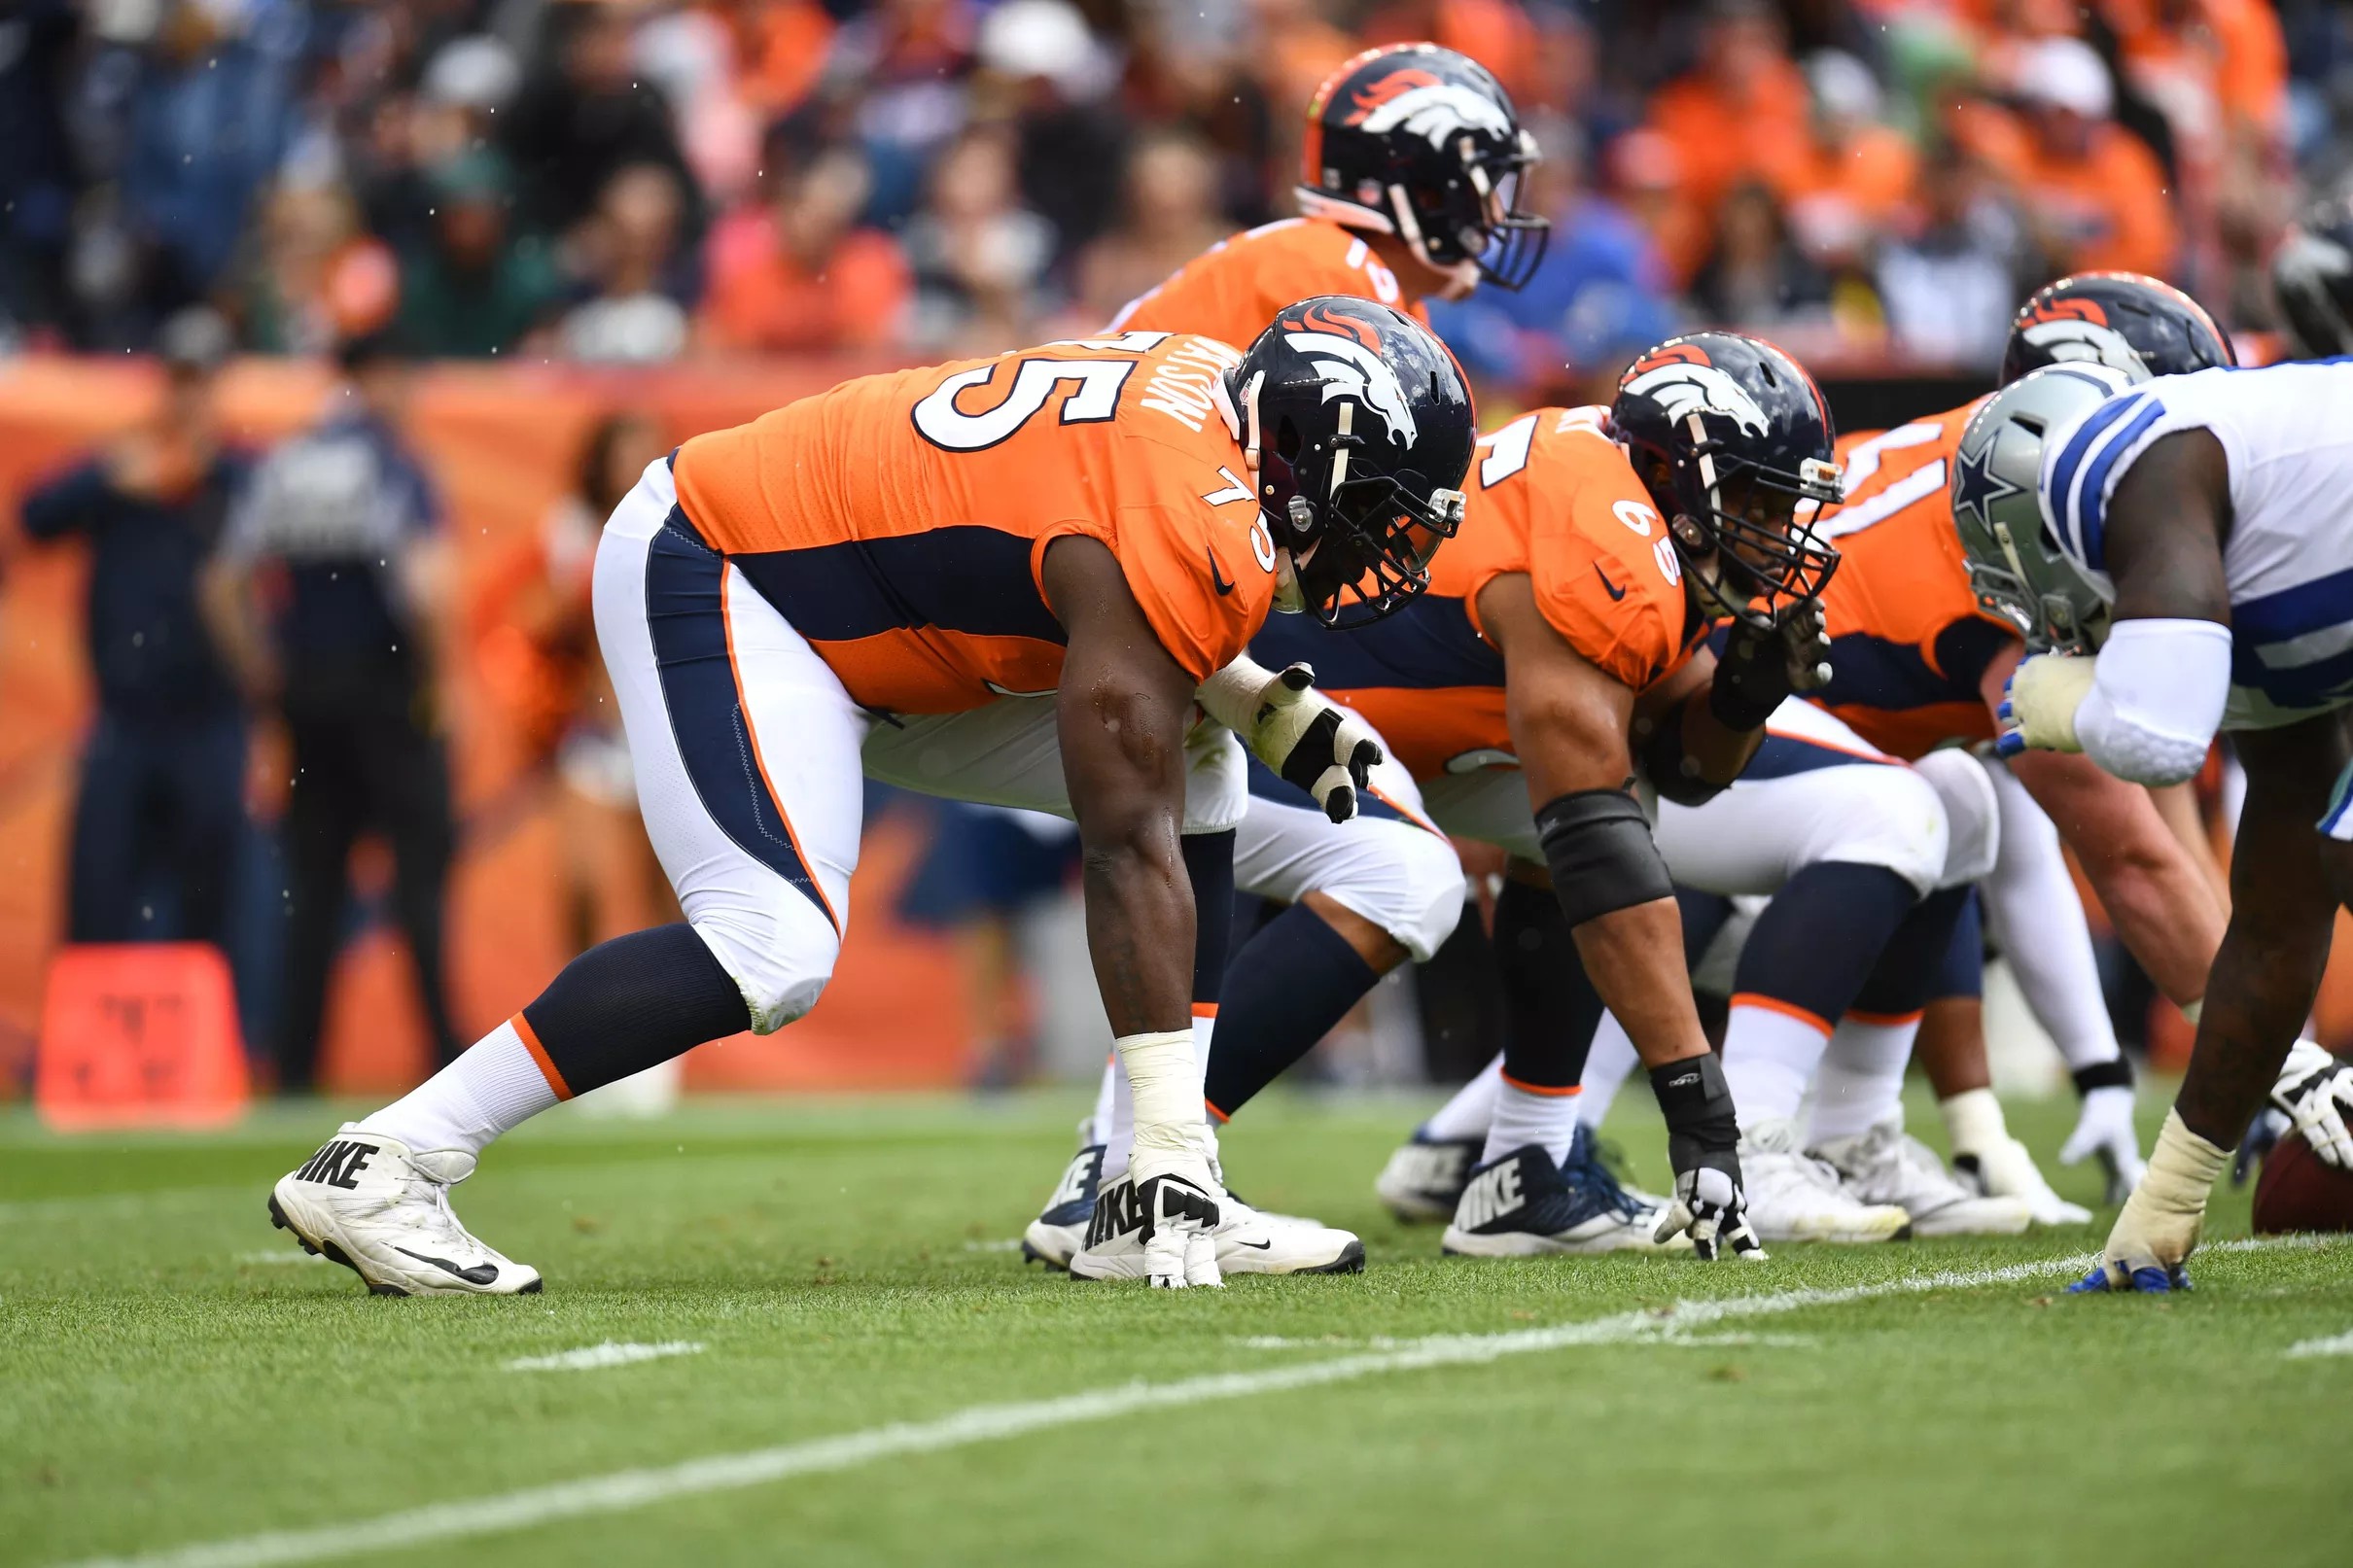 In Focus: Broncos offensive line not getting job done in pass protection